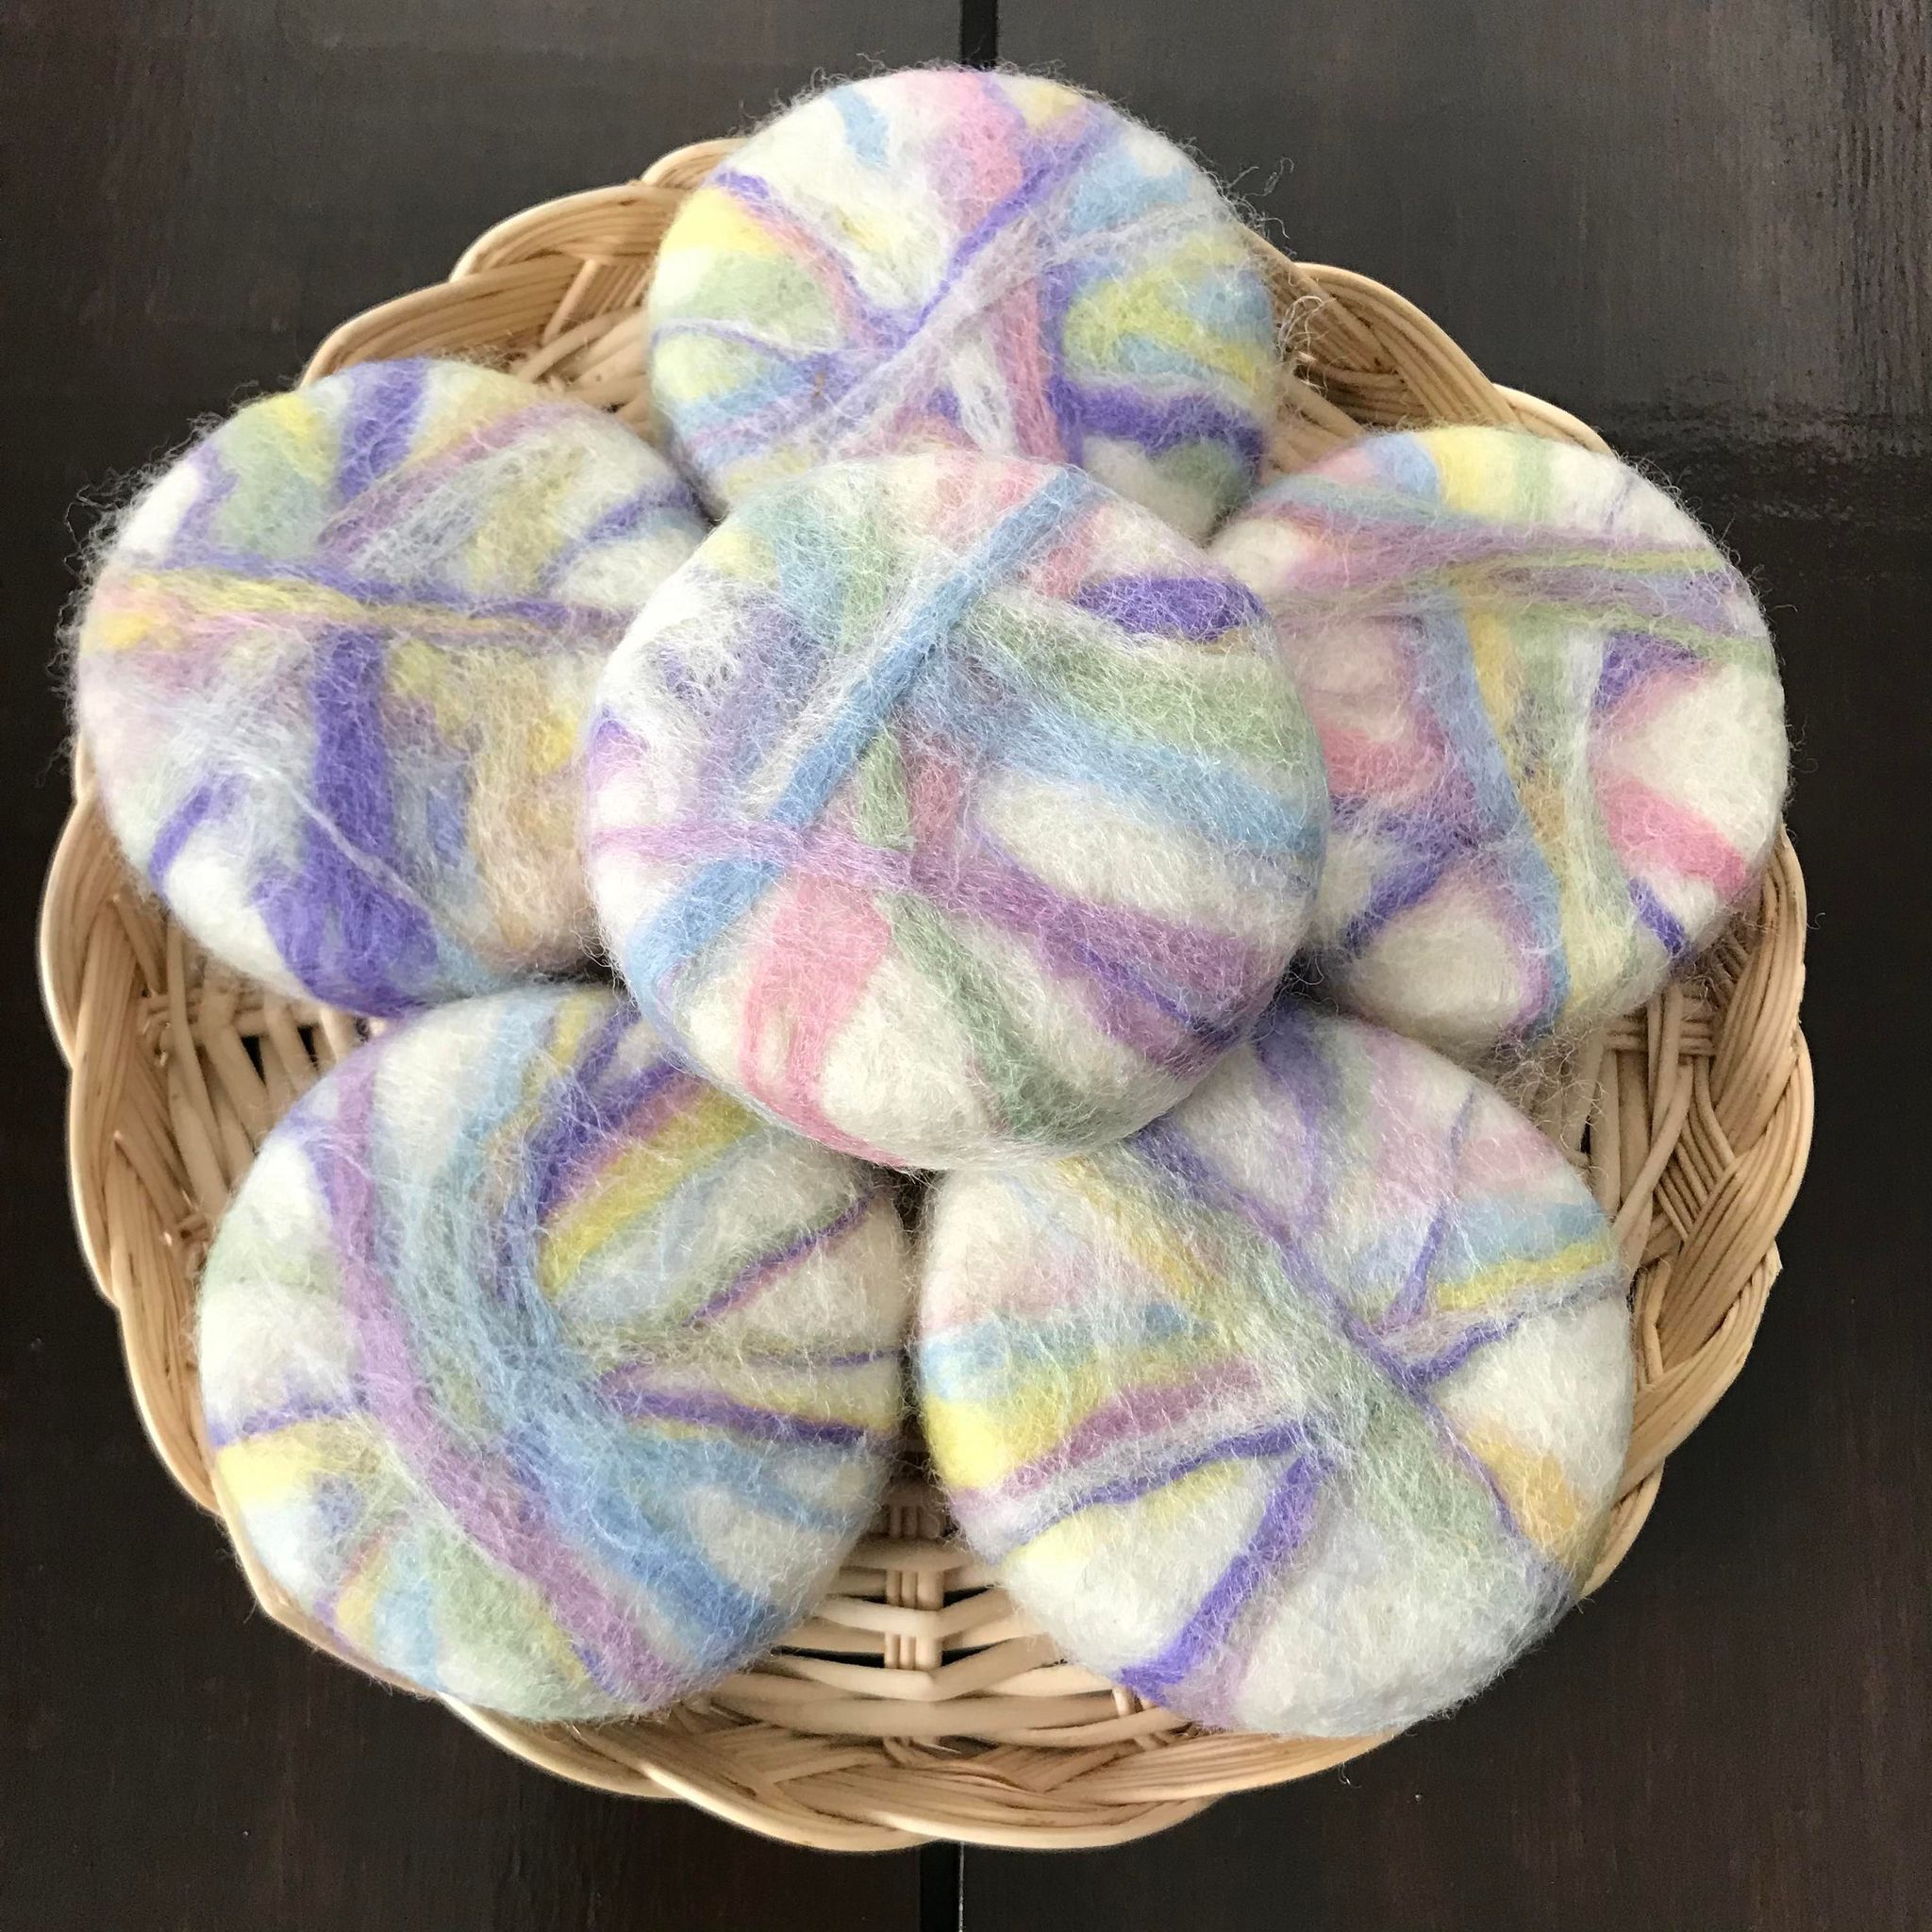 canadian made cedar sage essential oil simply natural canada round soaps on a wicker tray hand felted in spring easter shades on a white background using 100 per cent wool 